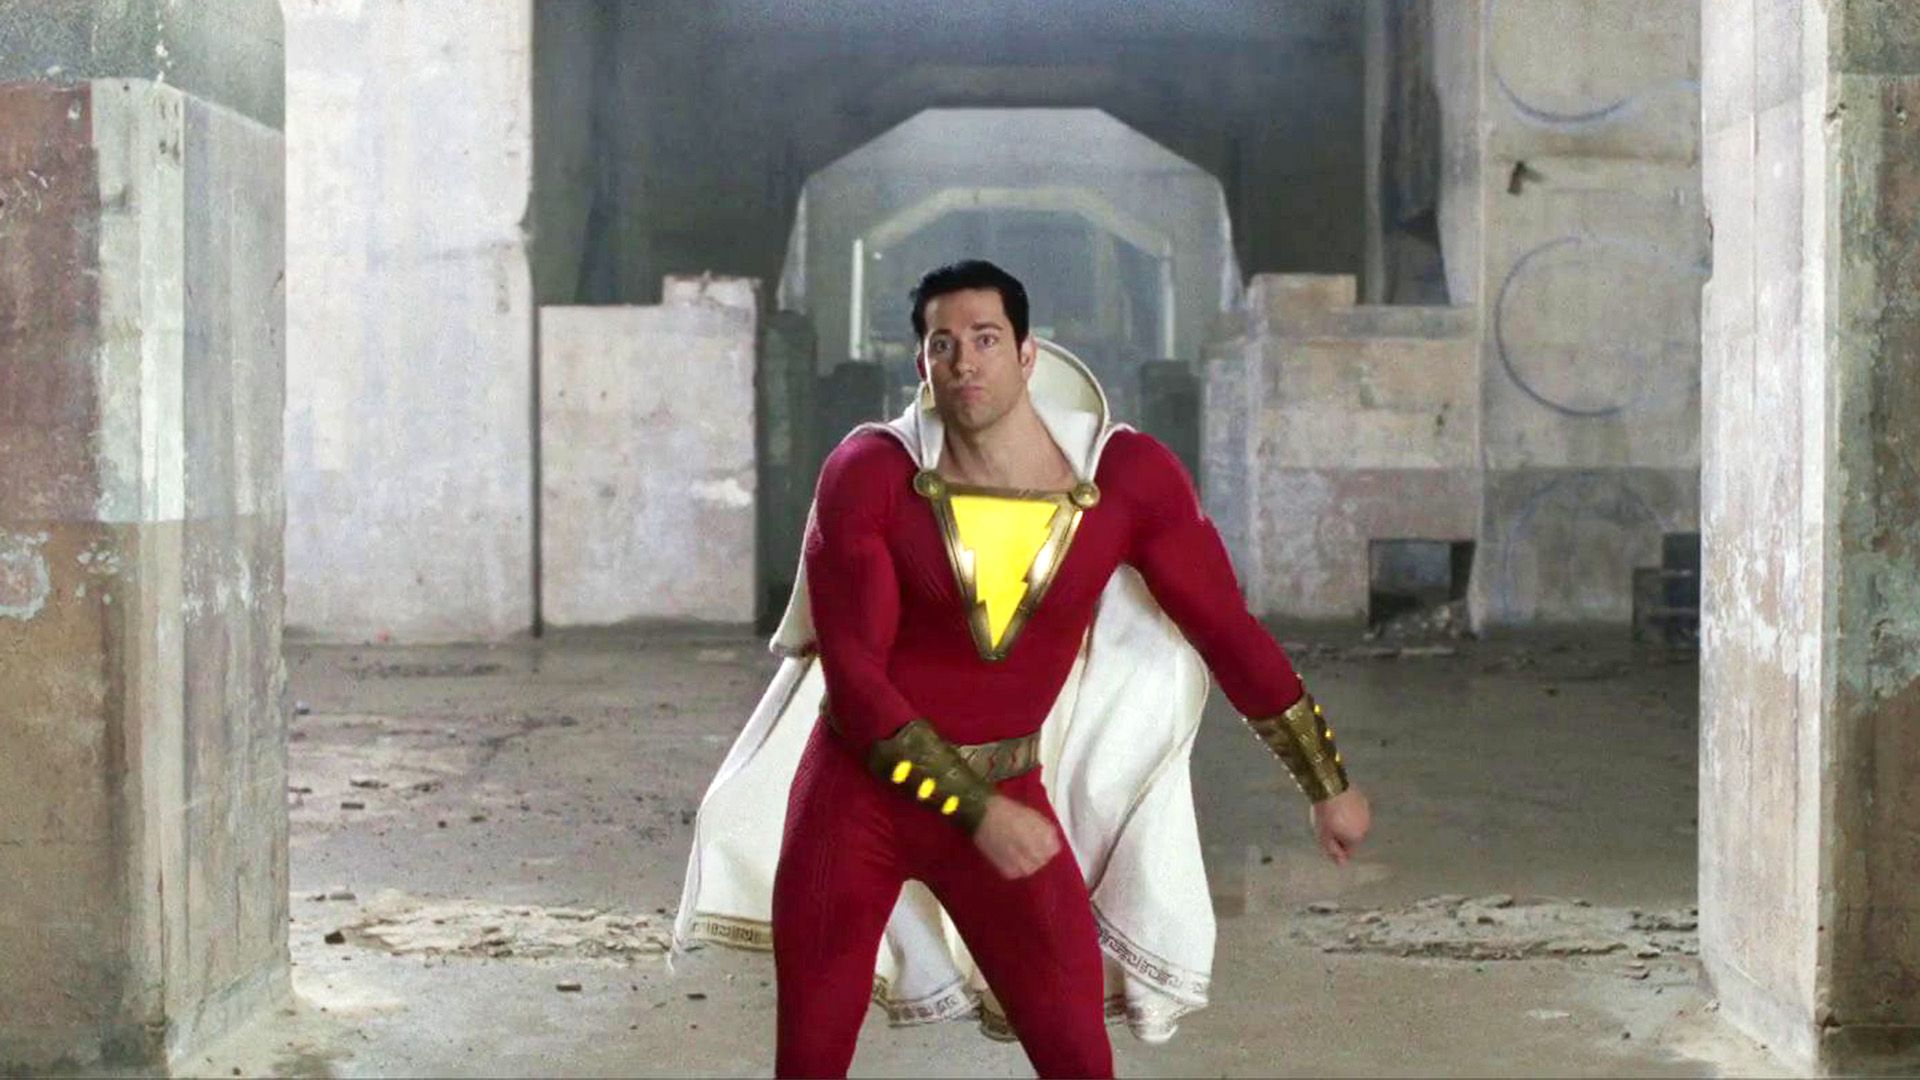 Next Shazam! Will Show A Better Version Of The Superhero's Suit